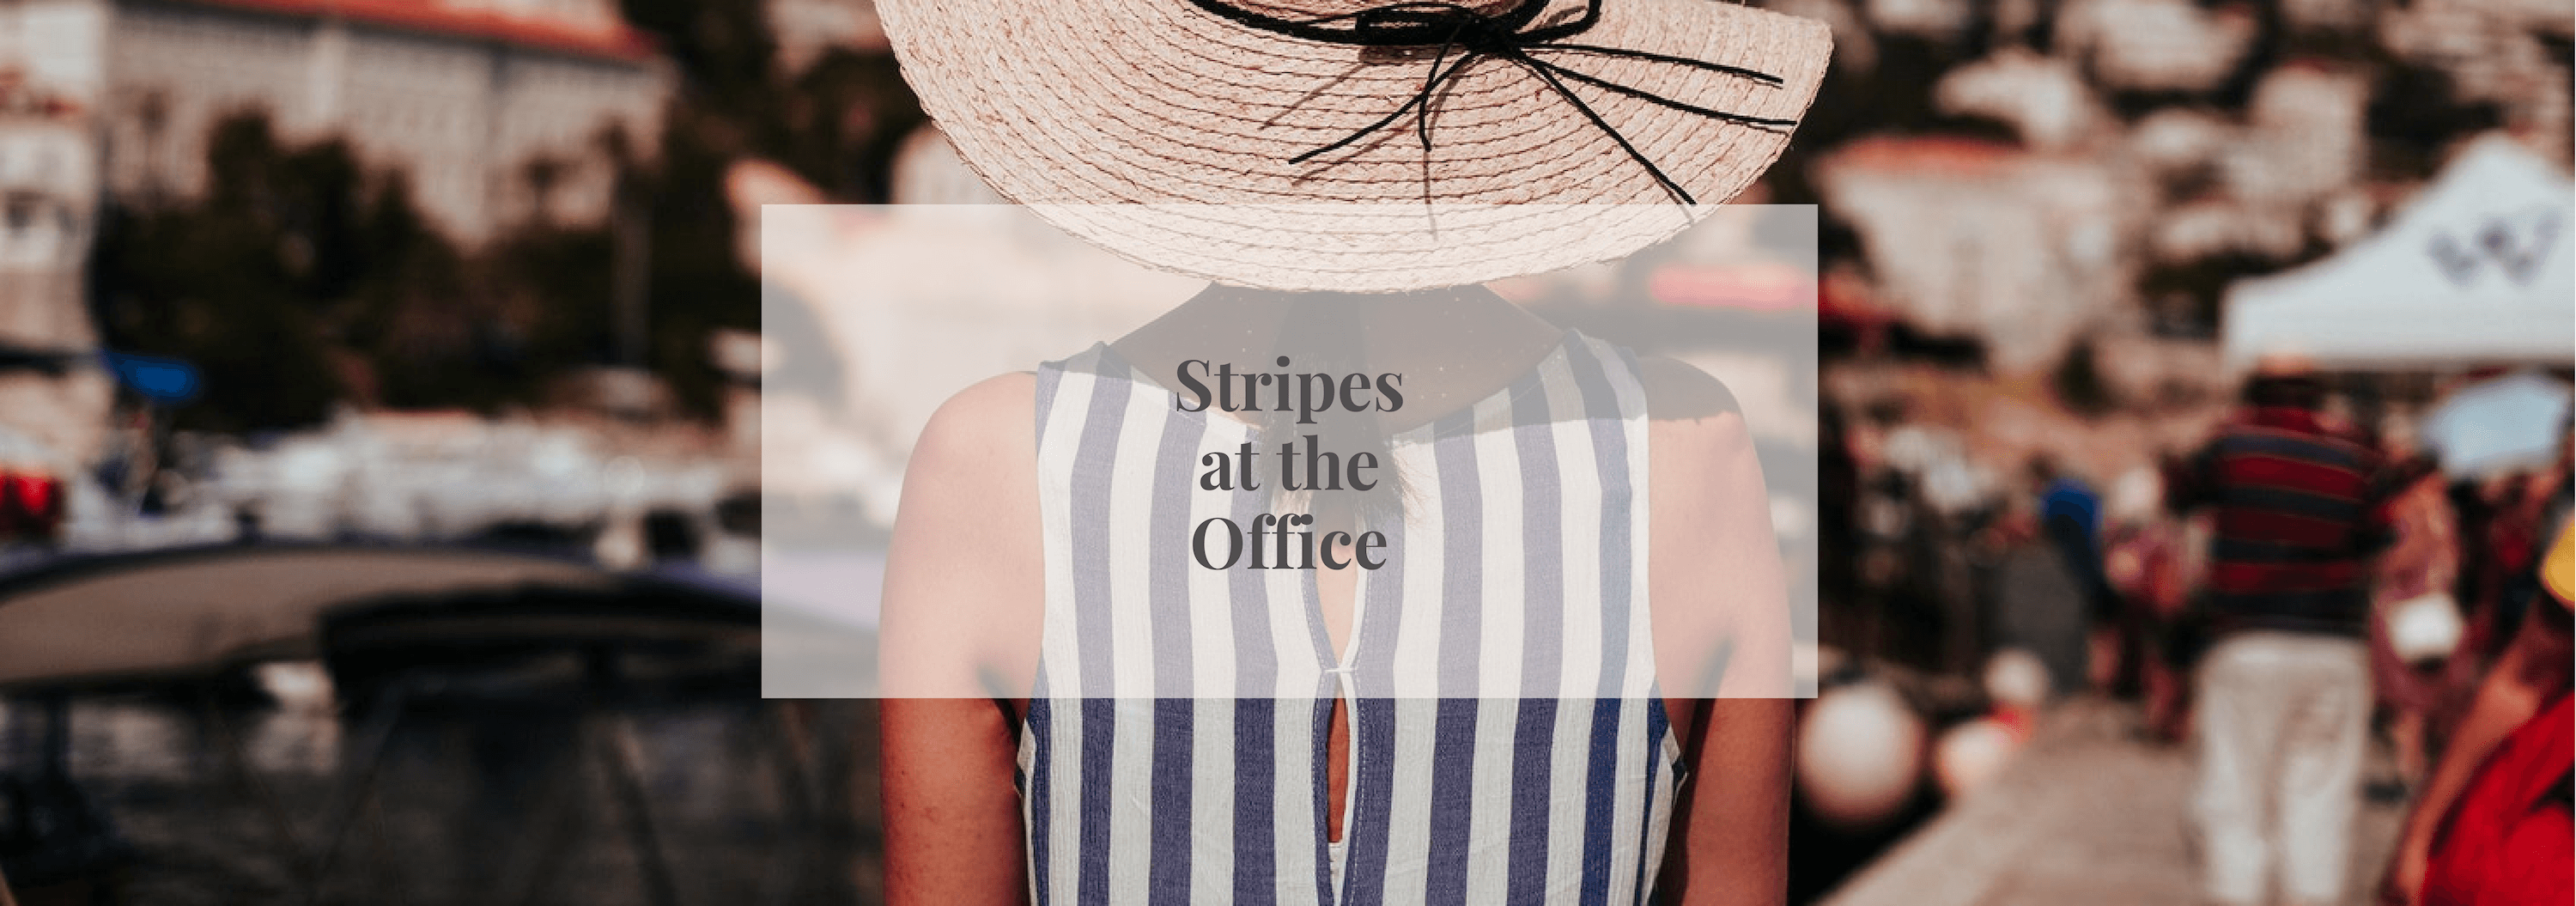 Wearing Stripes at the Office - Numi